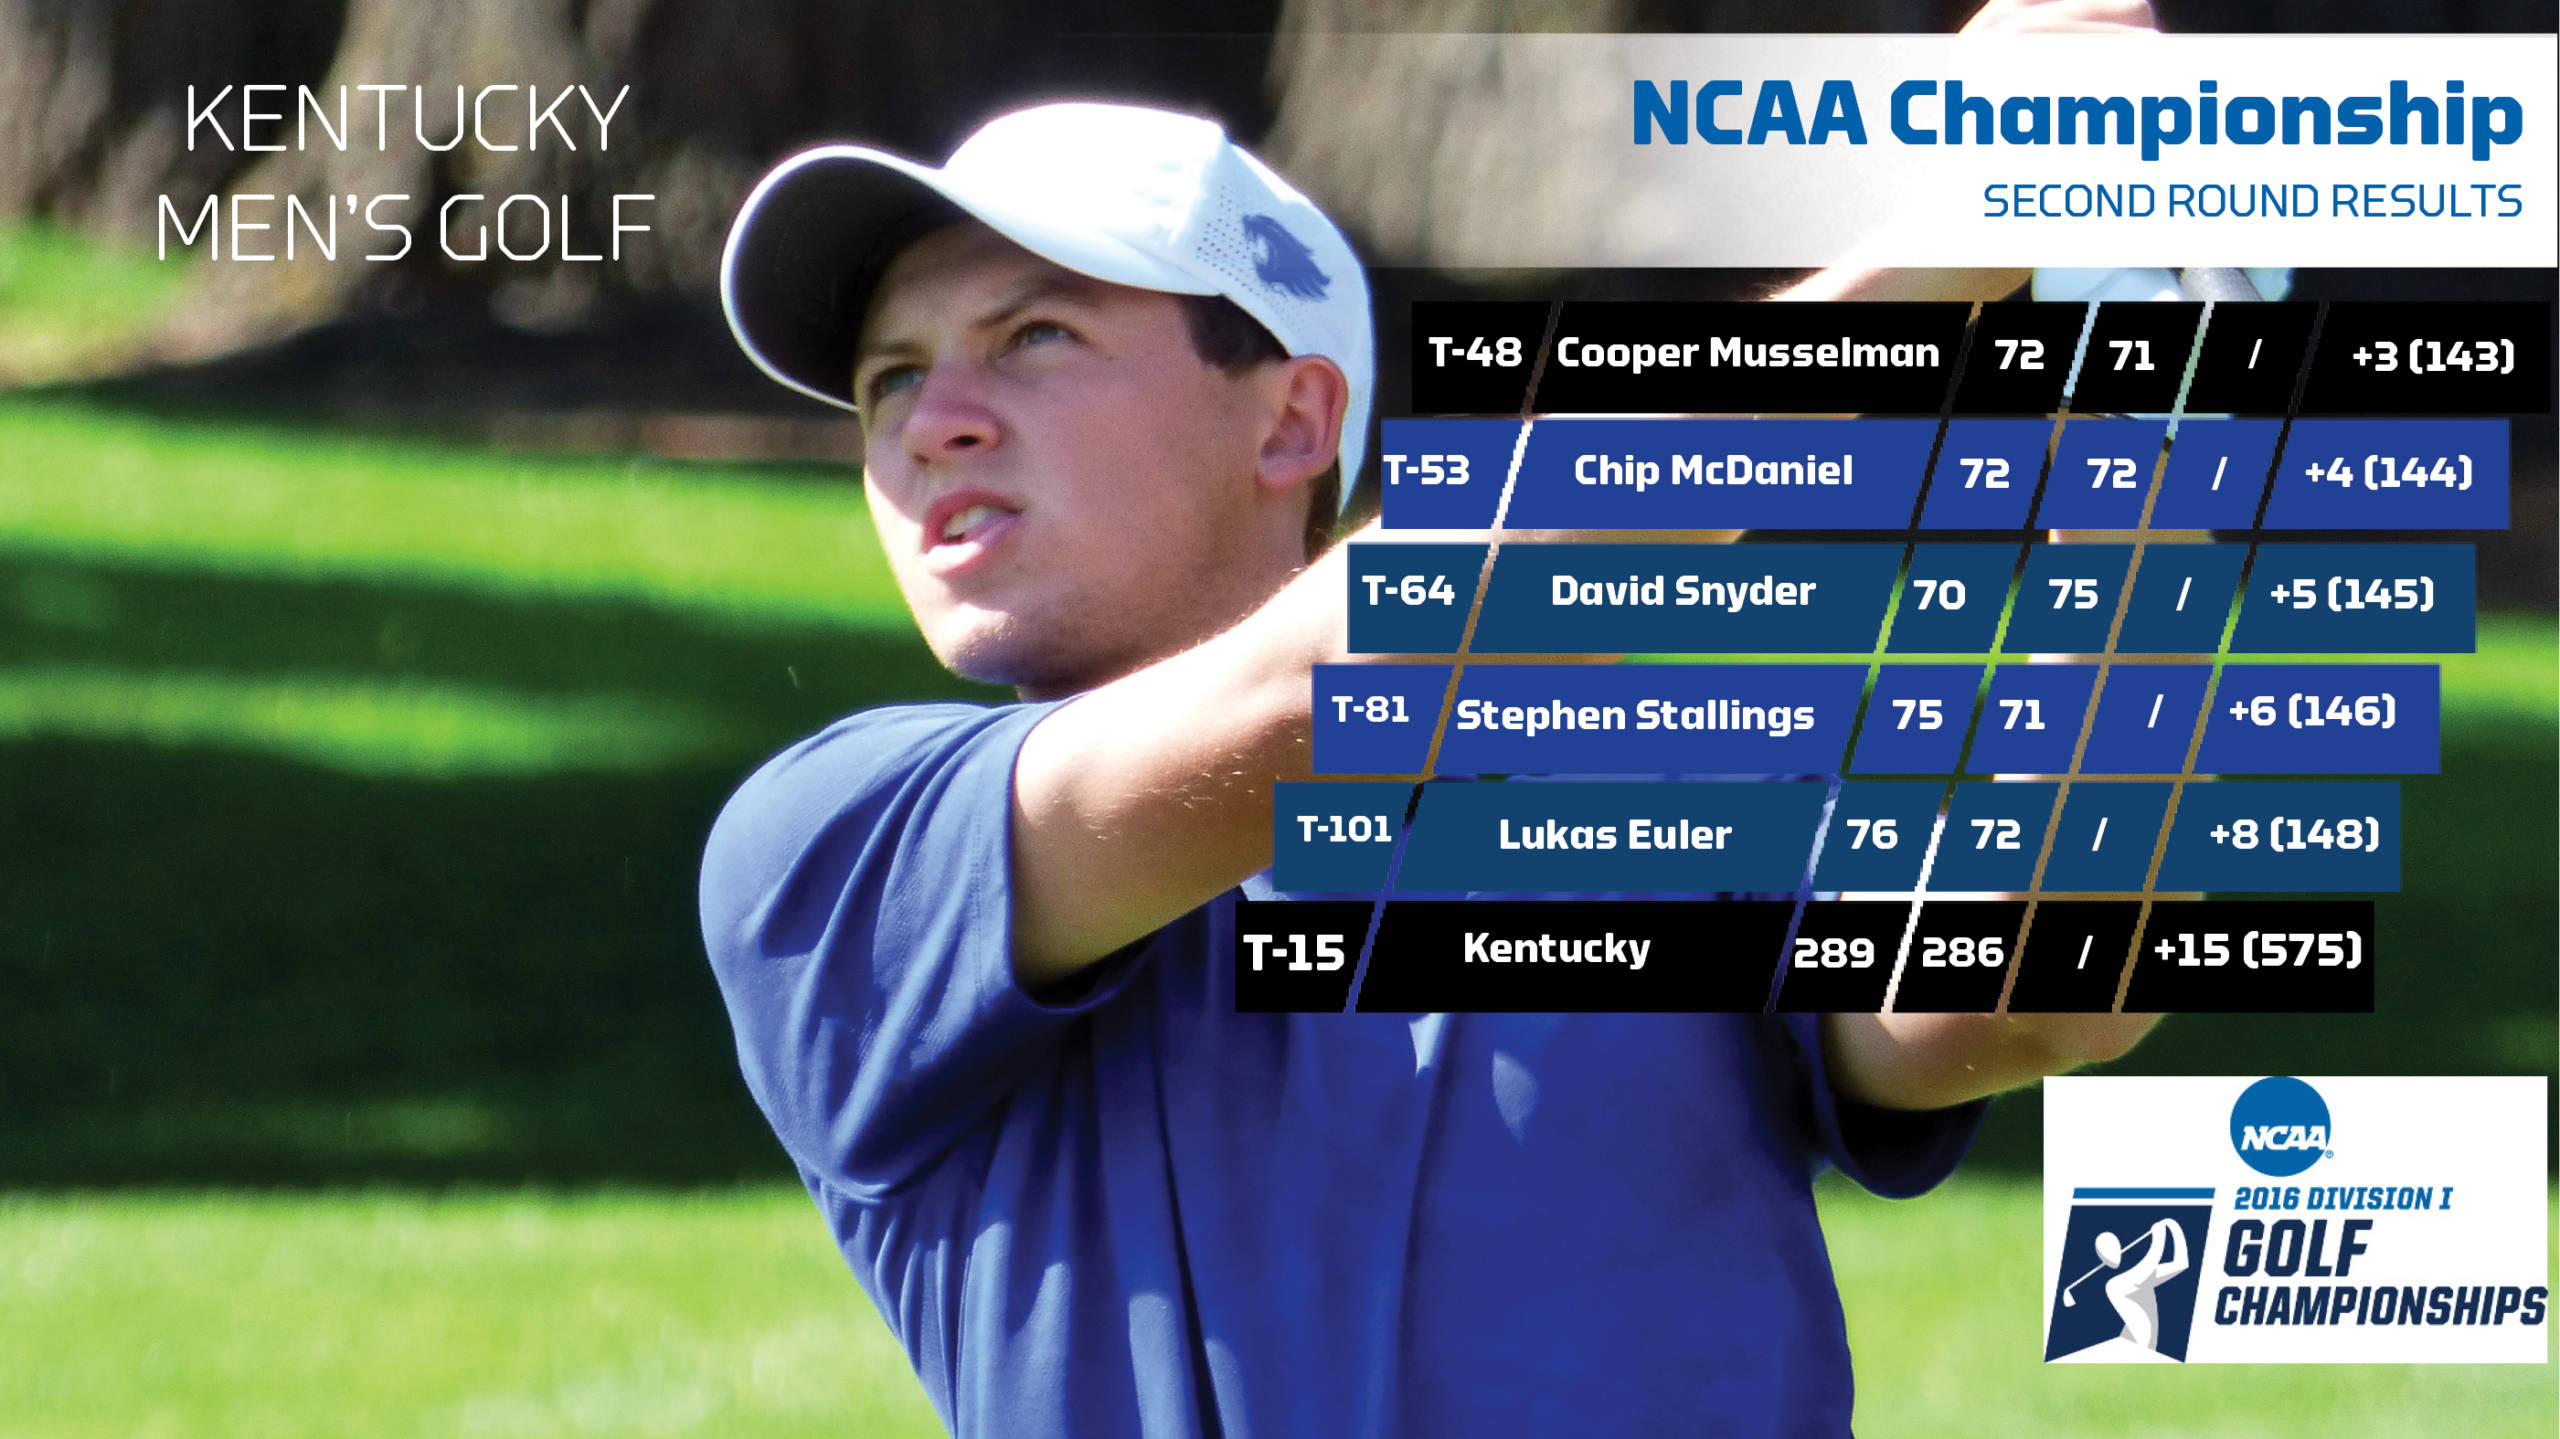 Kentucky in the Hunt Heading into Final Round on Sunday